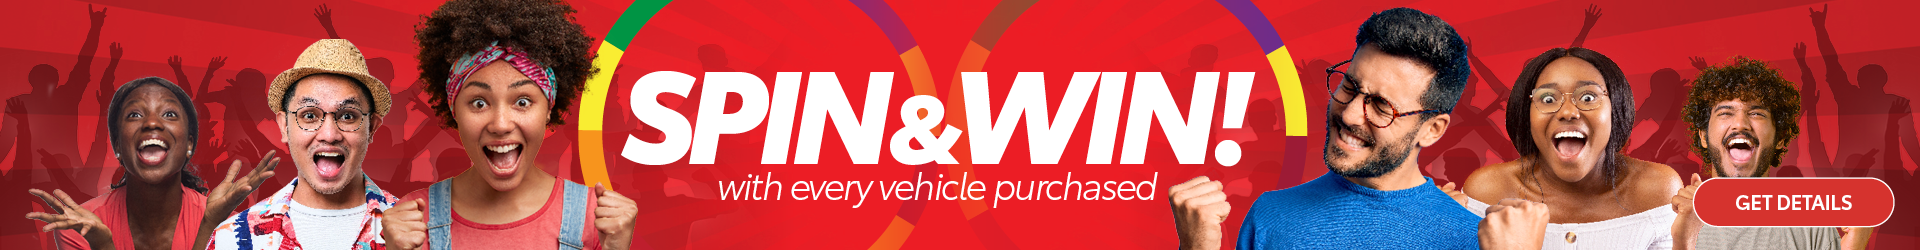 Spin & Win Purchase with every vehicle